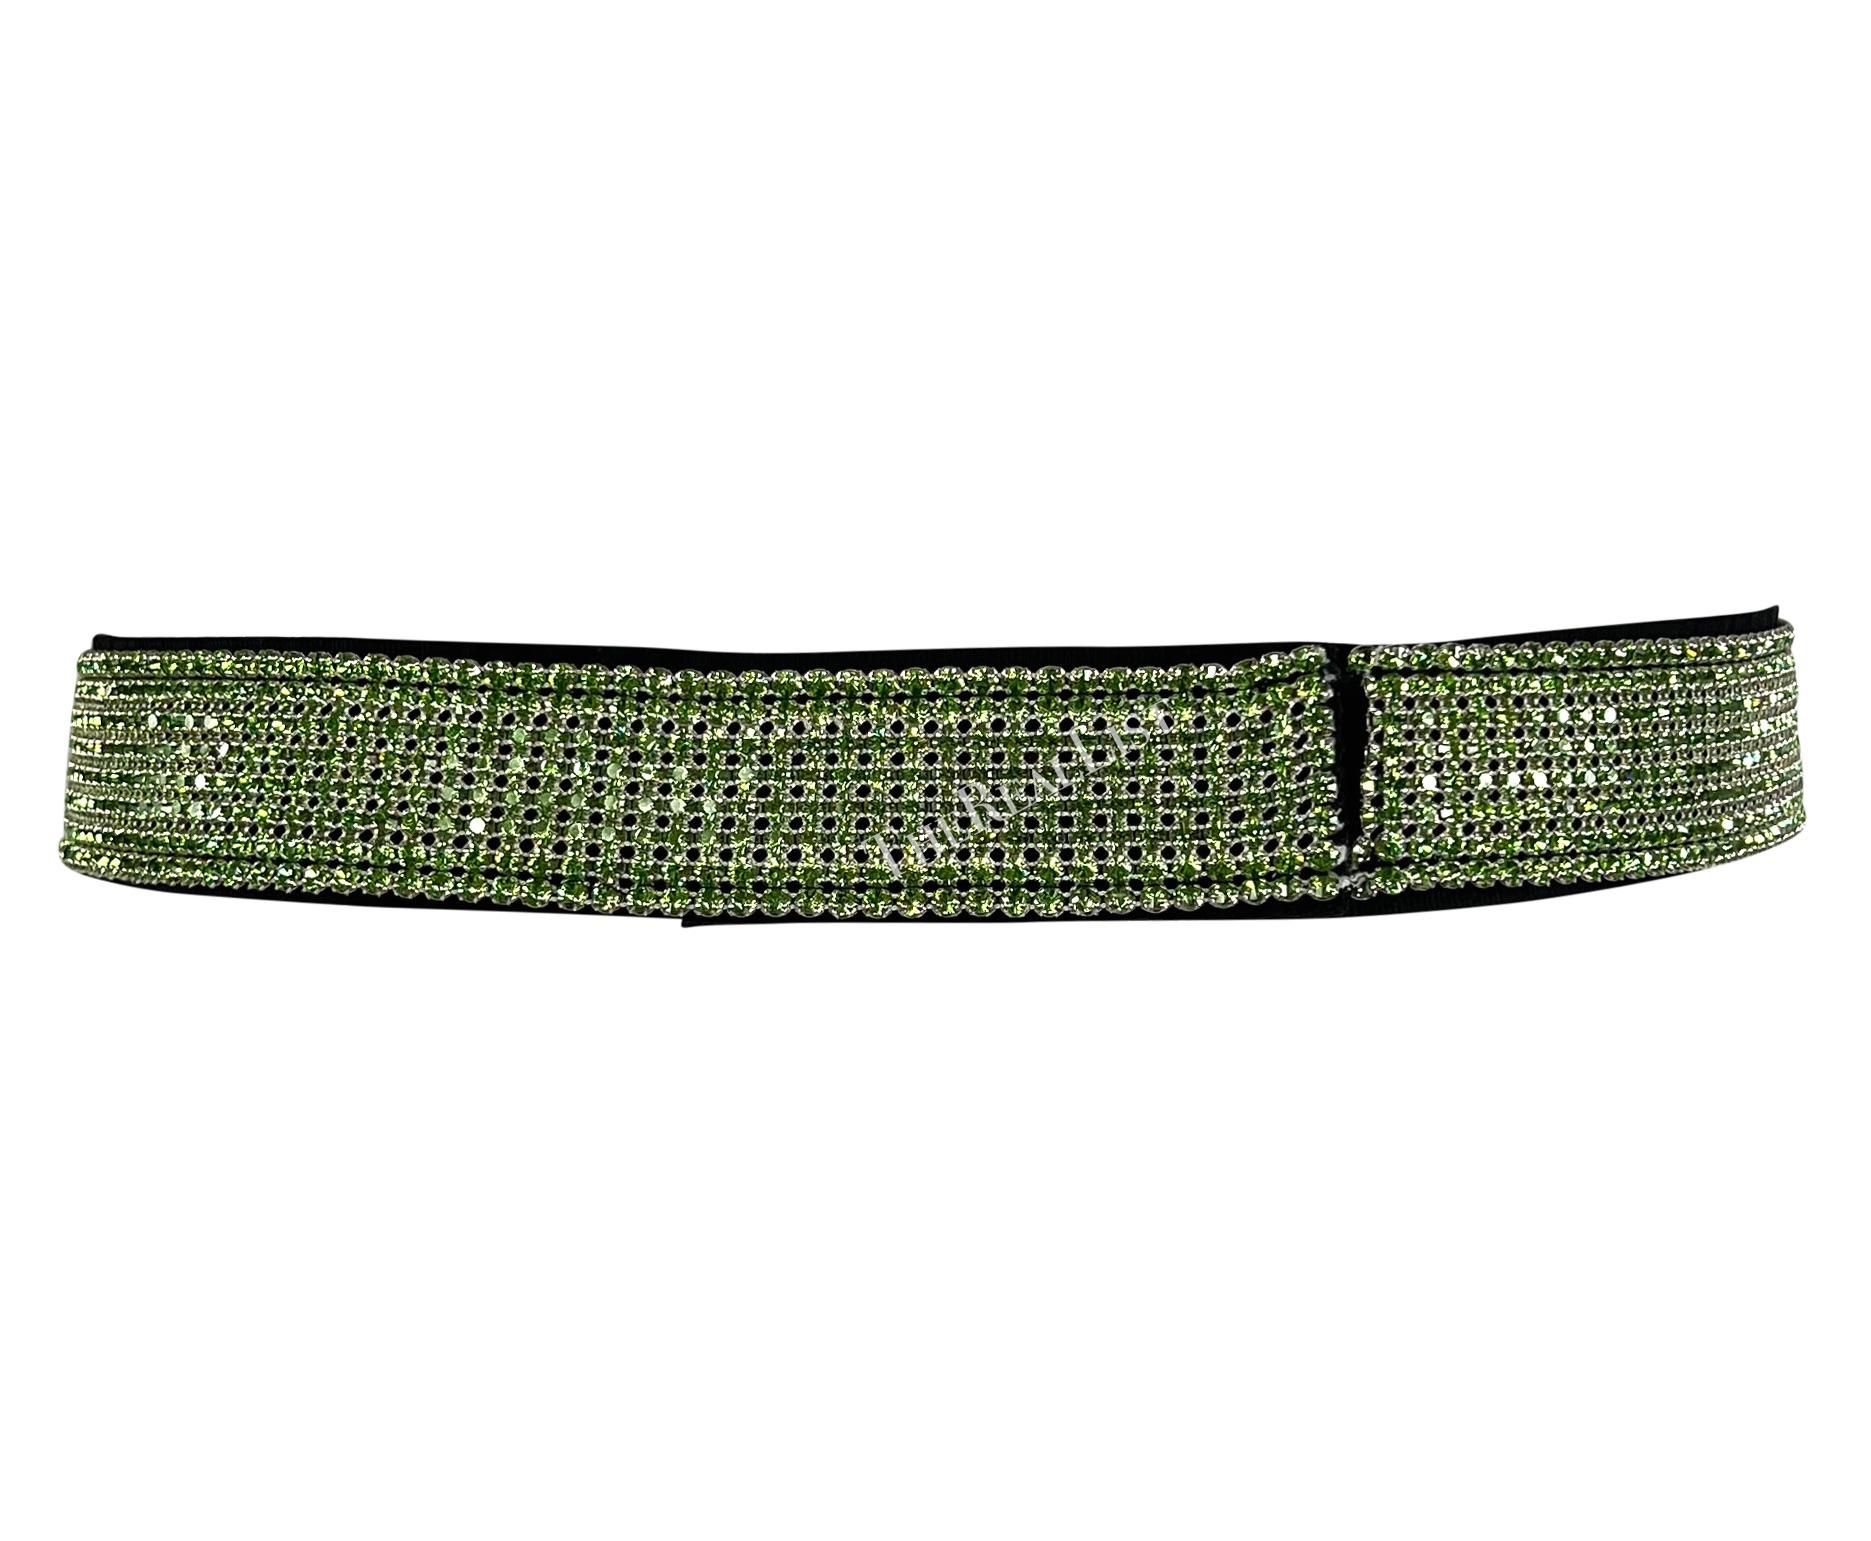 F/W 2000 Dolce & Gabbana Rhinestone Green Rhinestone Belt In Excellent Condition For Sale In West Hollywood, CA